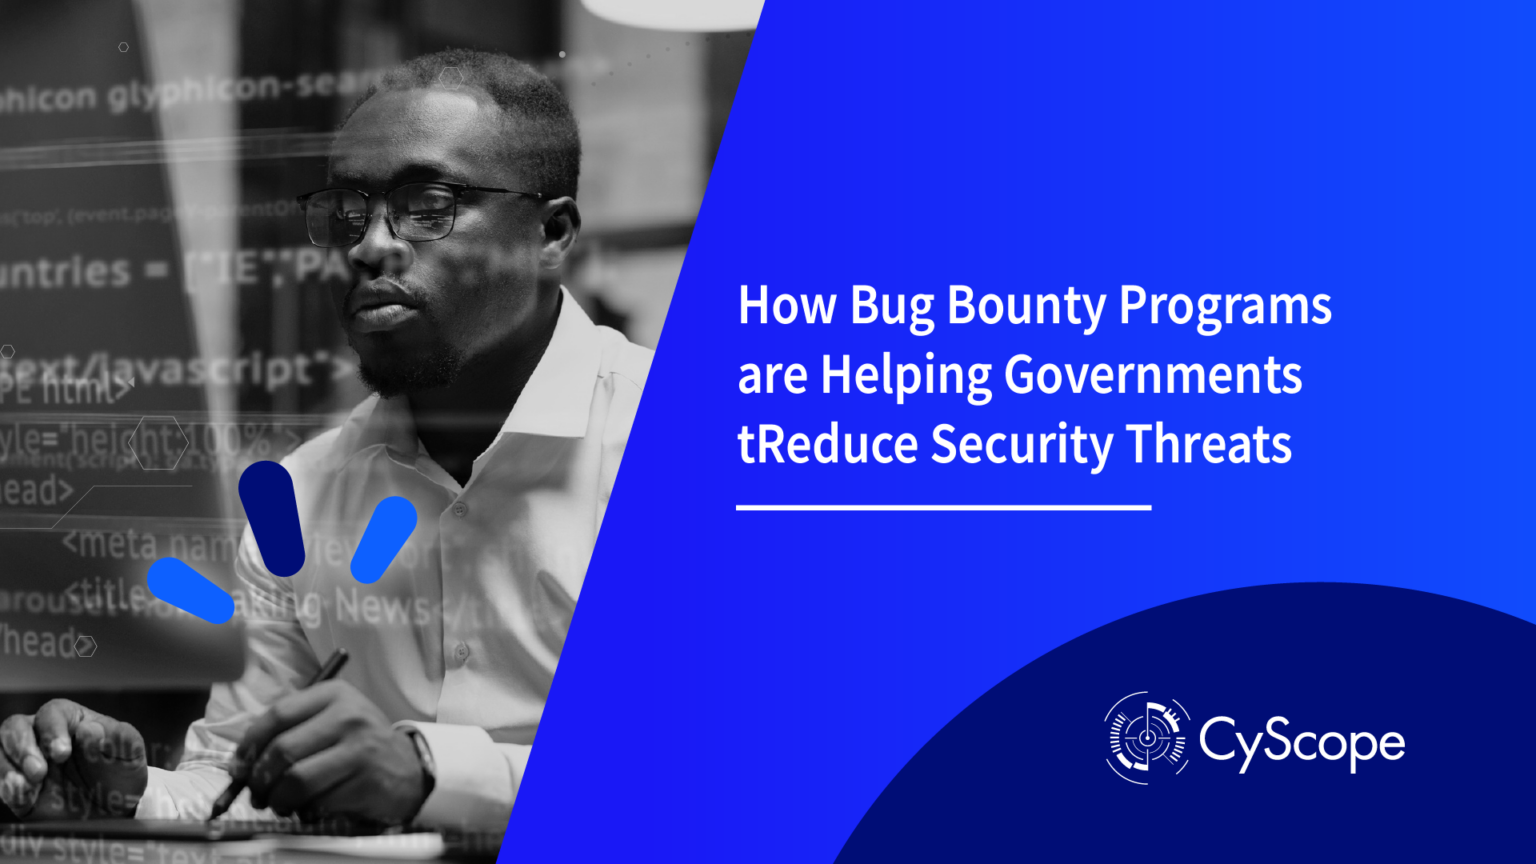 How Bug Bounty Programs are Helping Governments Reduce Security Threats